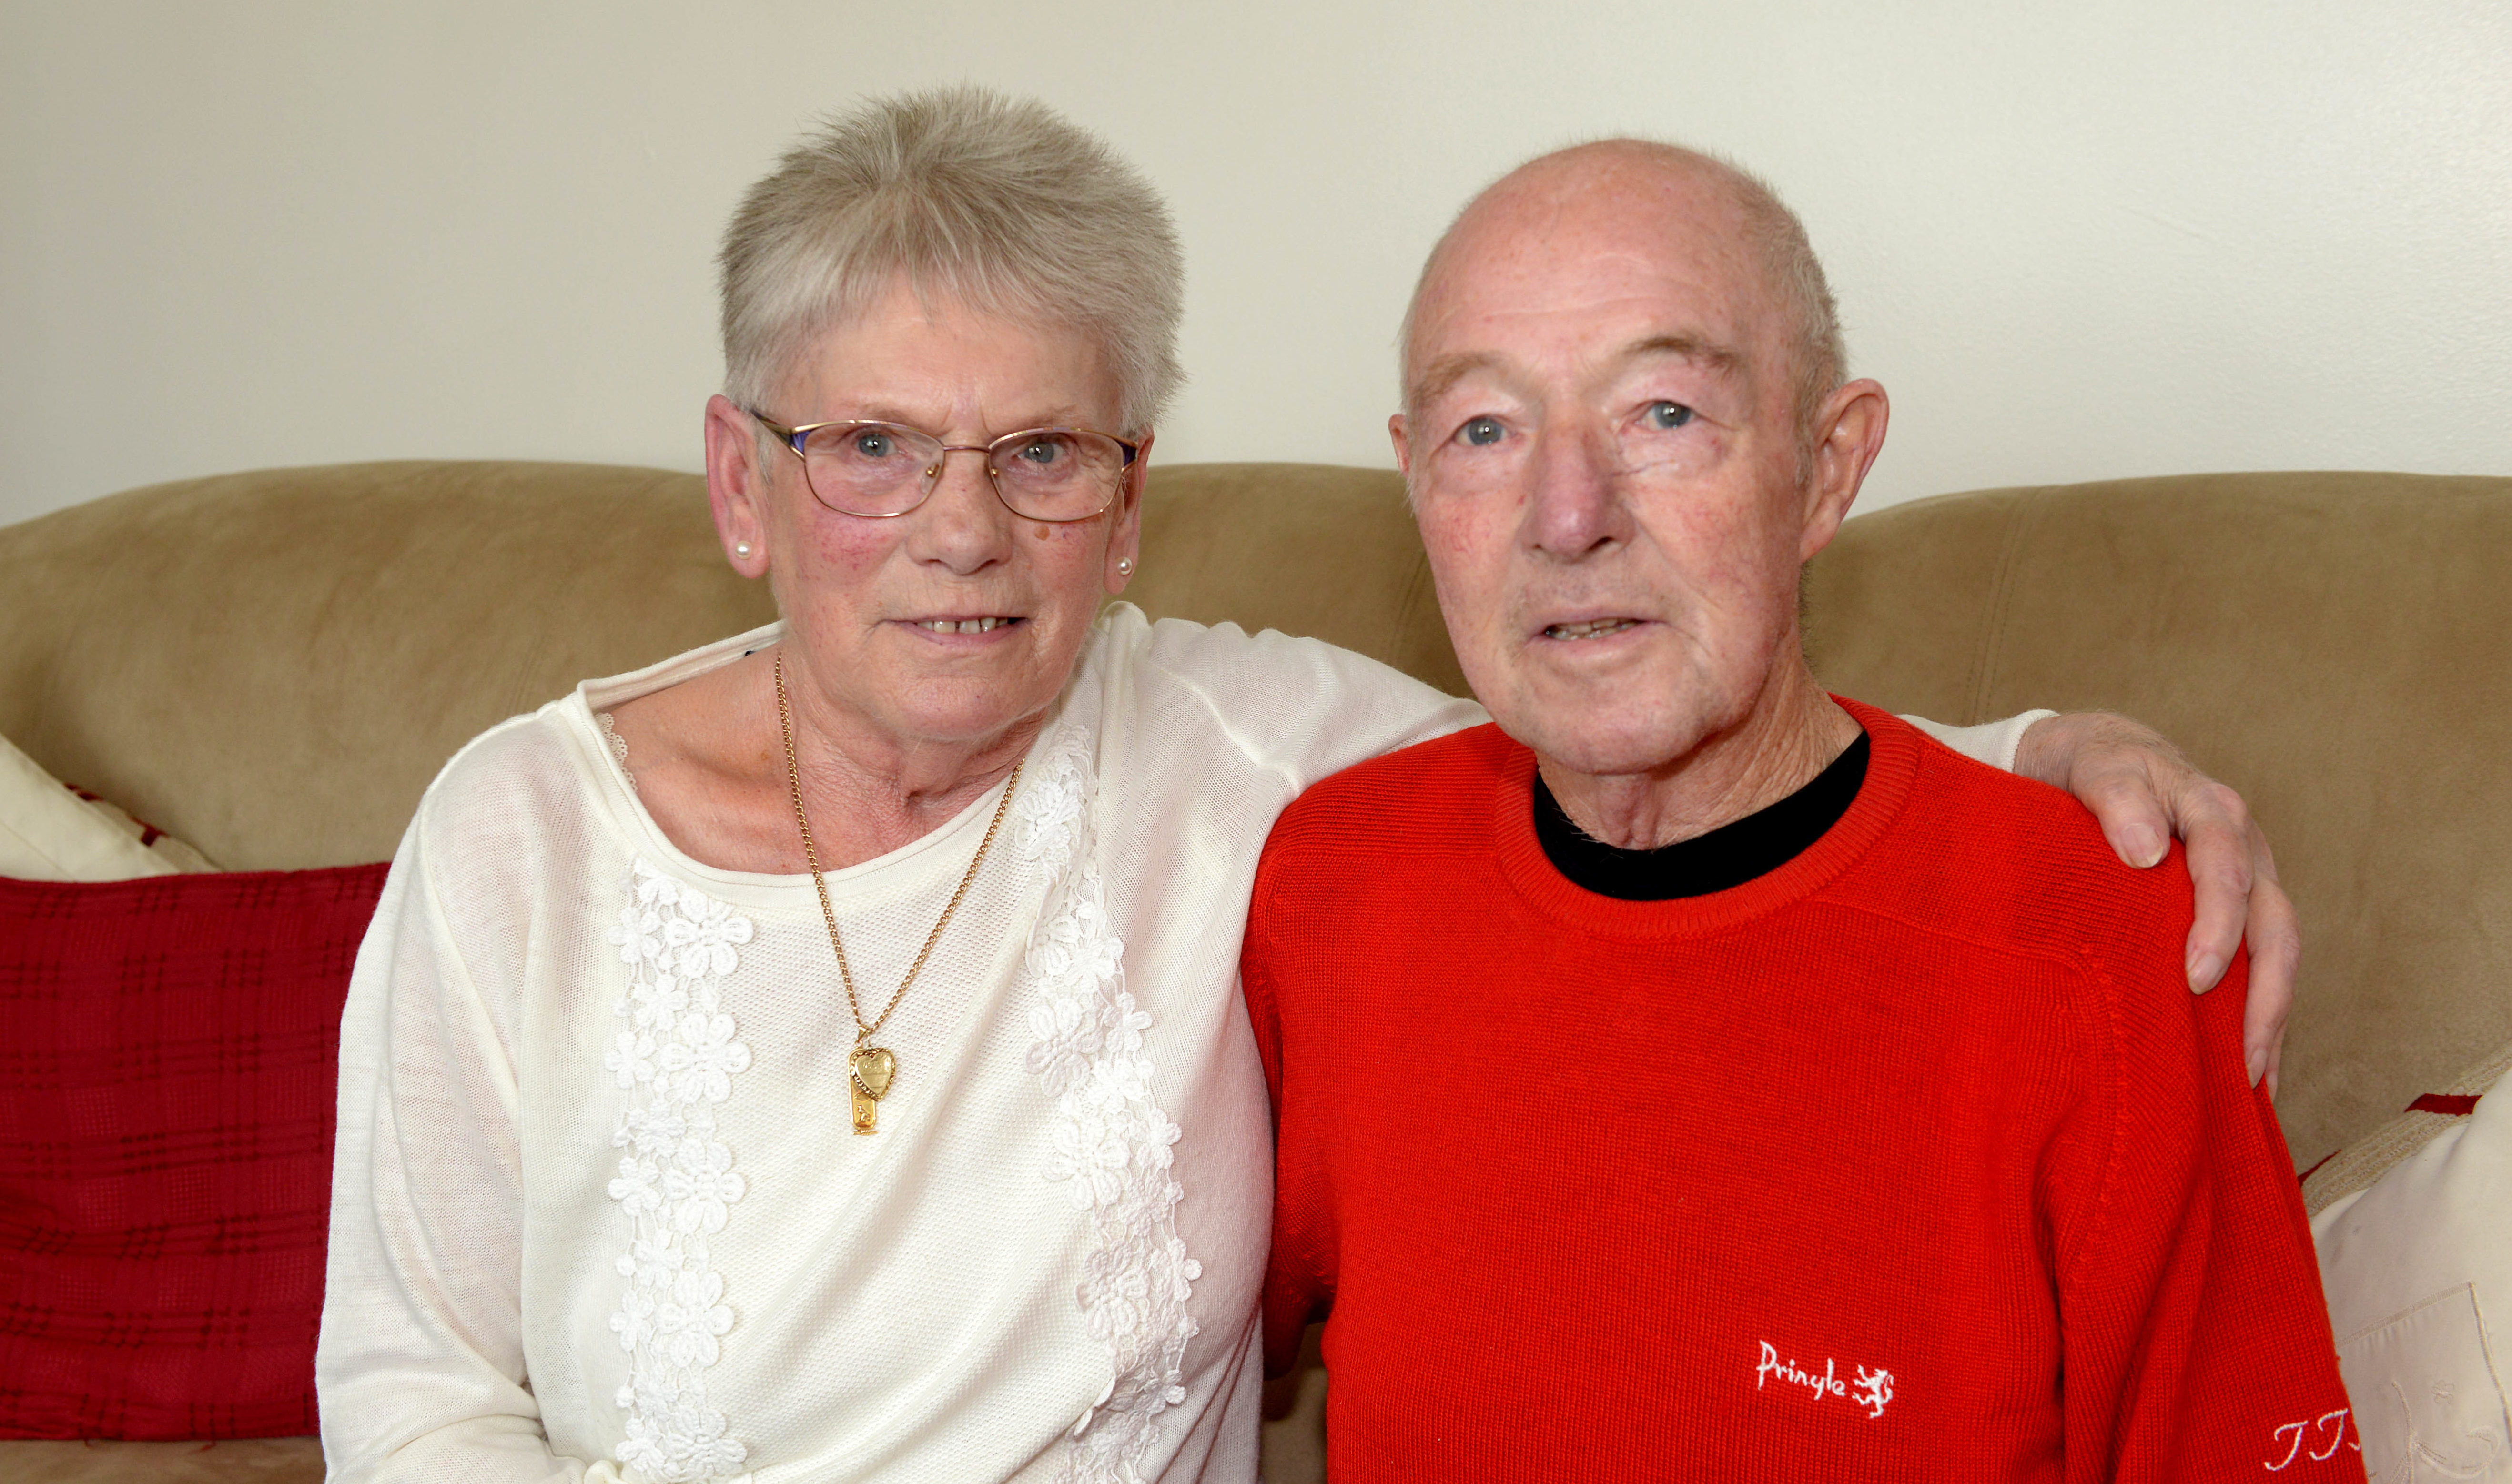 Tom Reid pictured with his wife Myra.